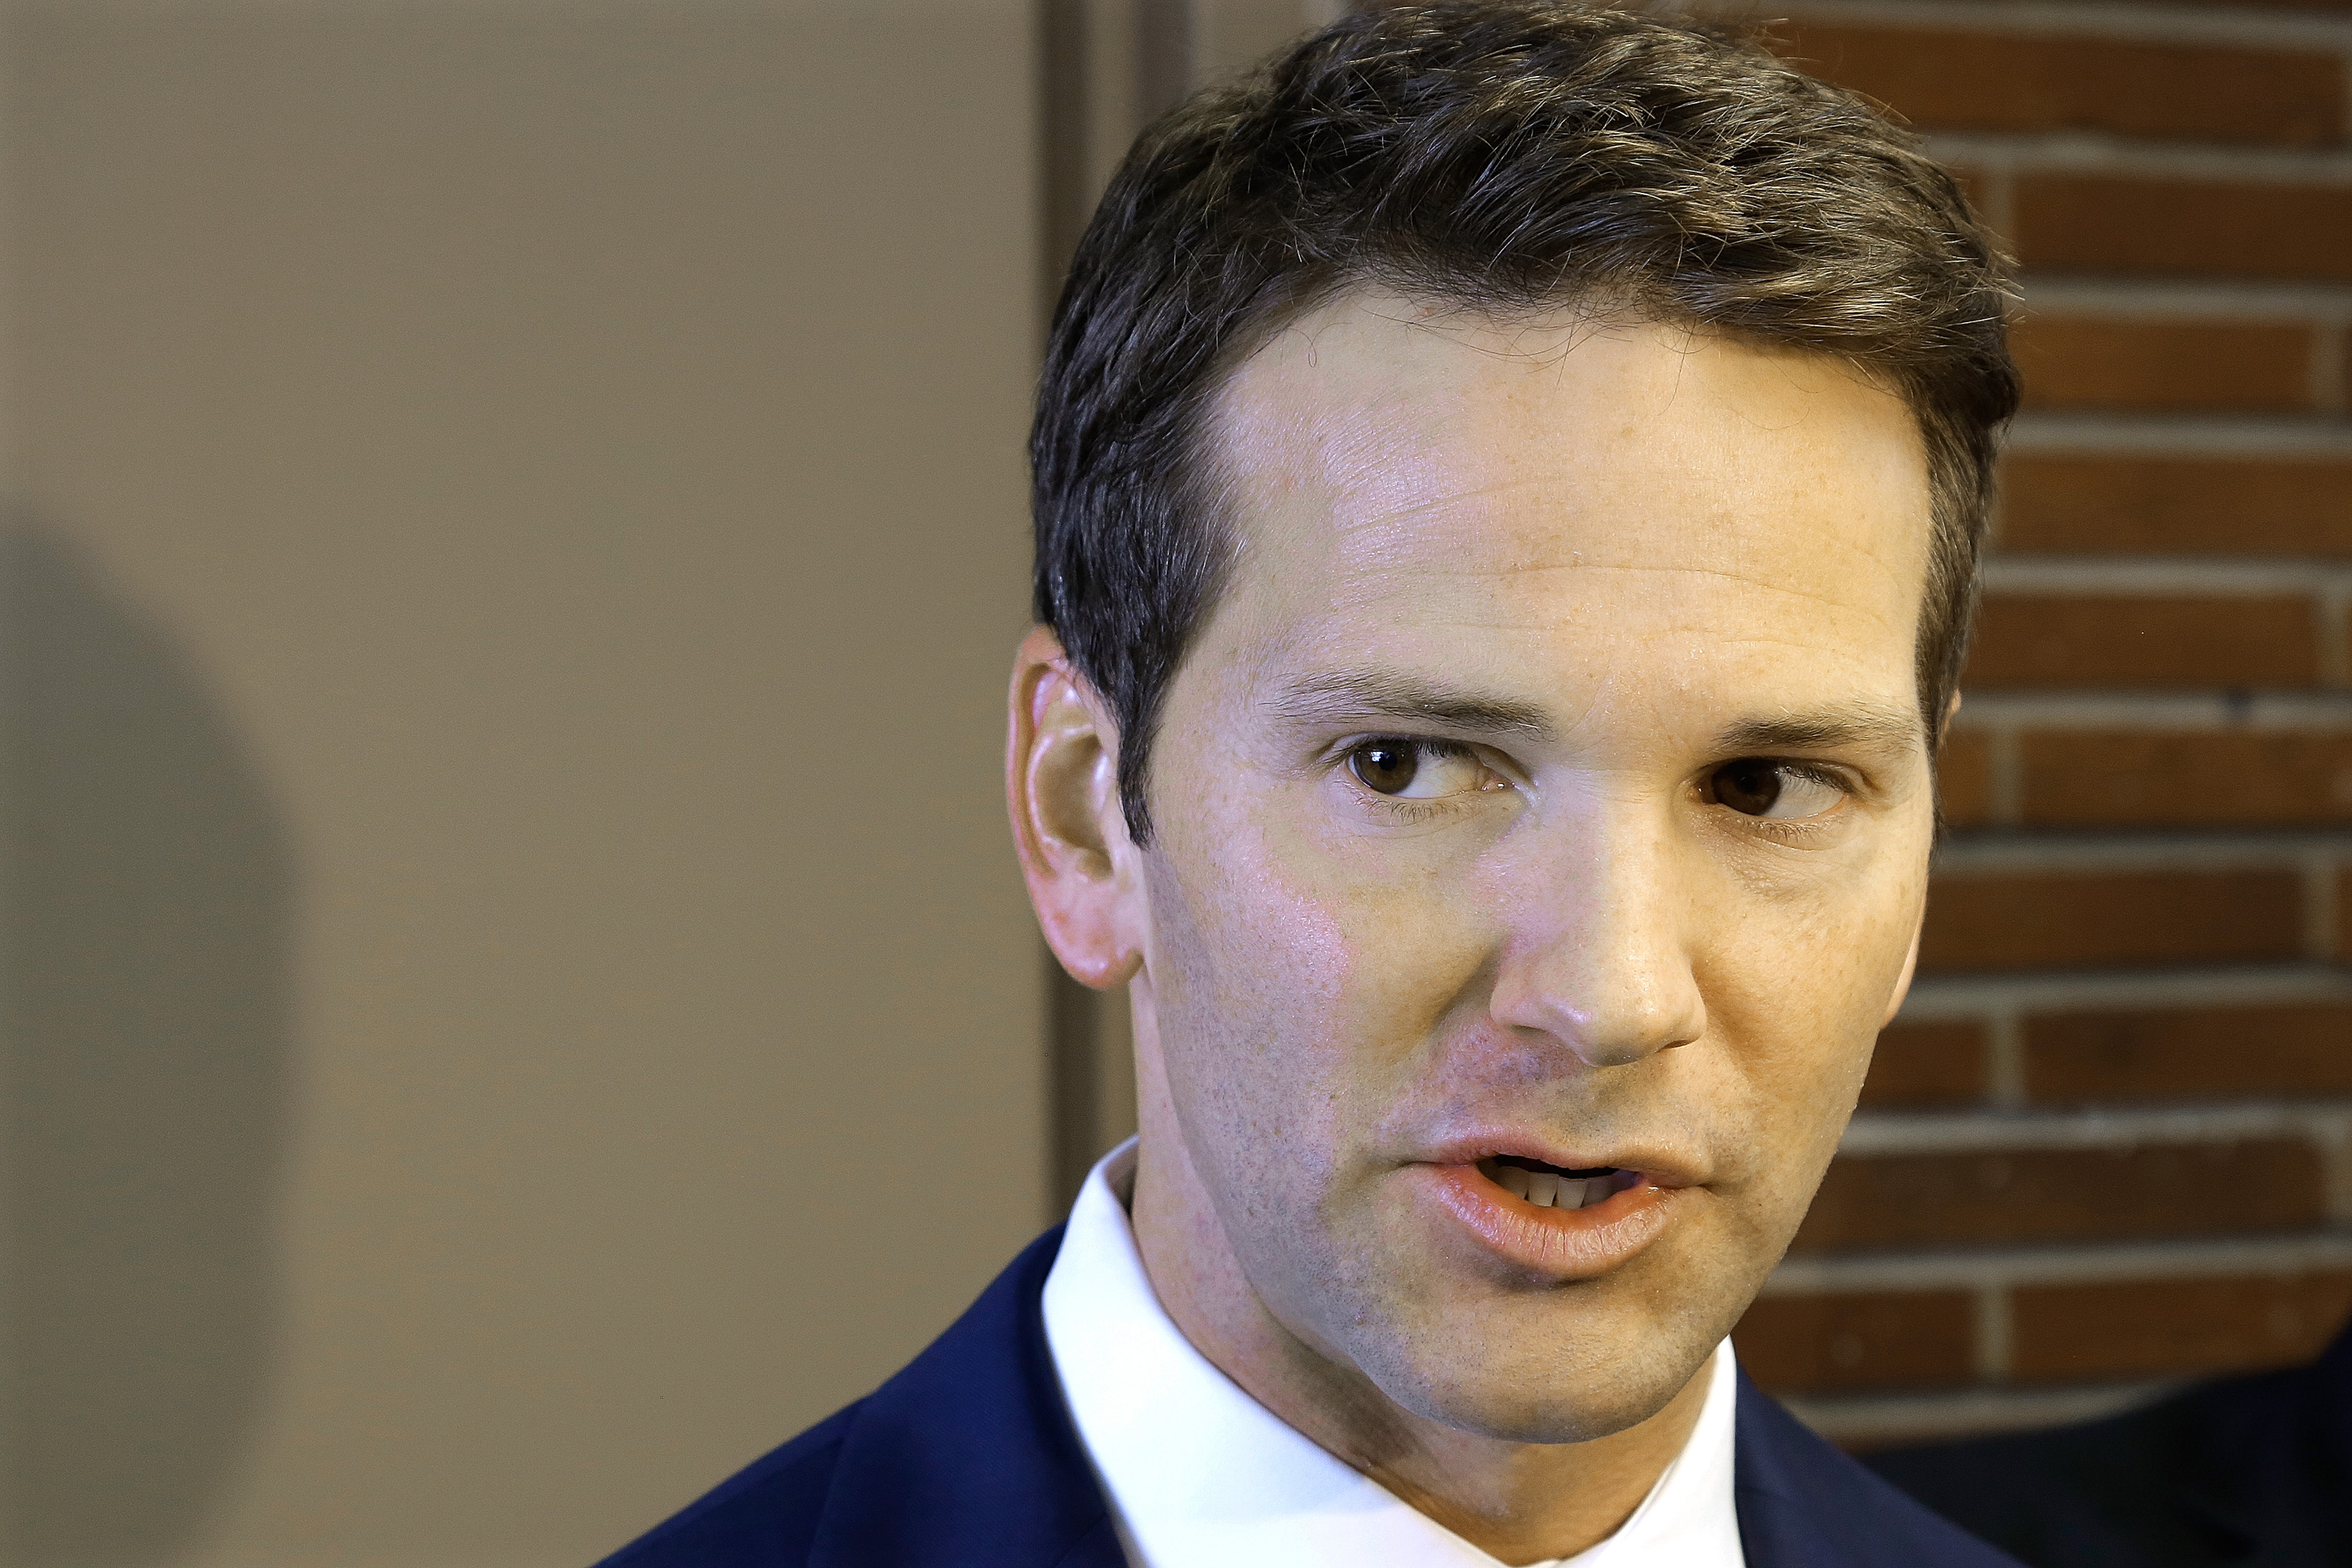 Ex Rep Aaron Schock Of Illinois Indicted By Federal Grand Jury Cbs News 3483